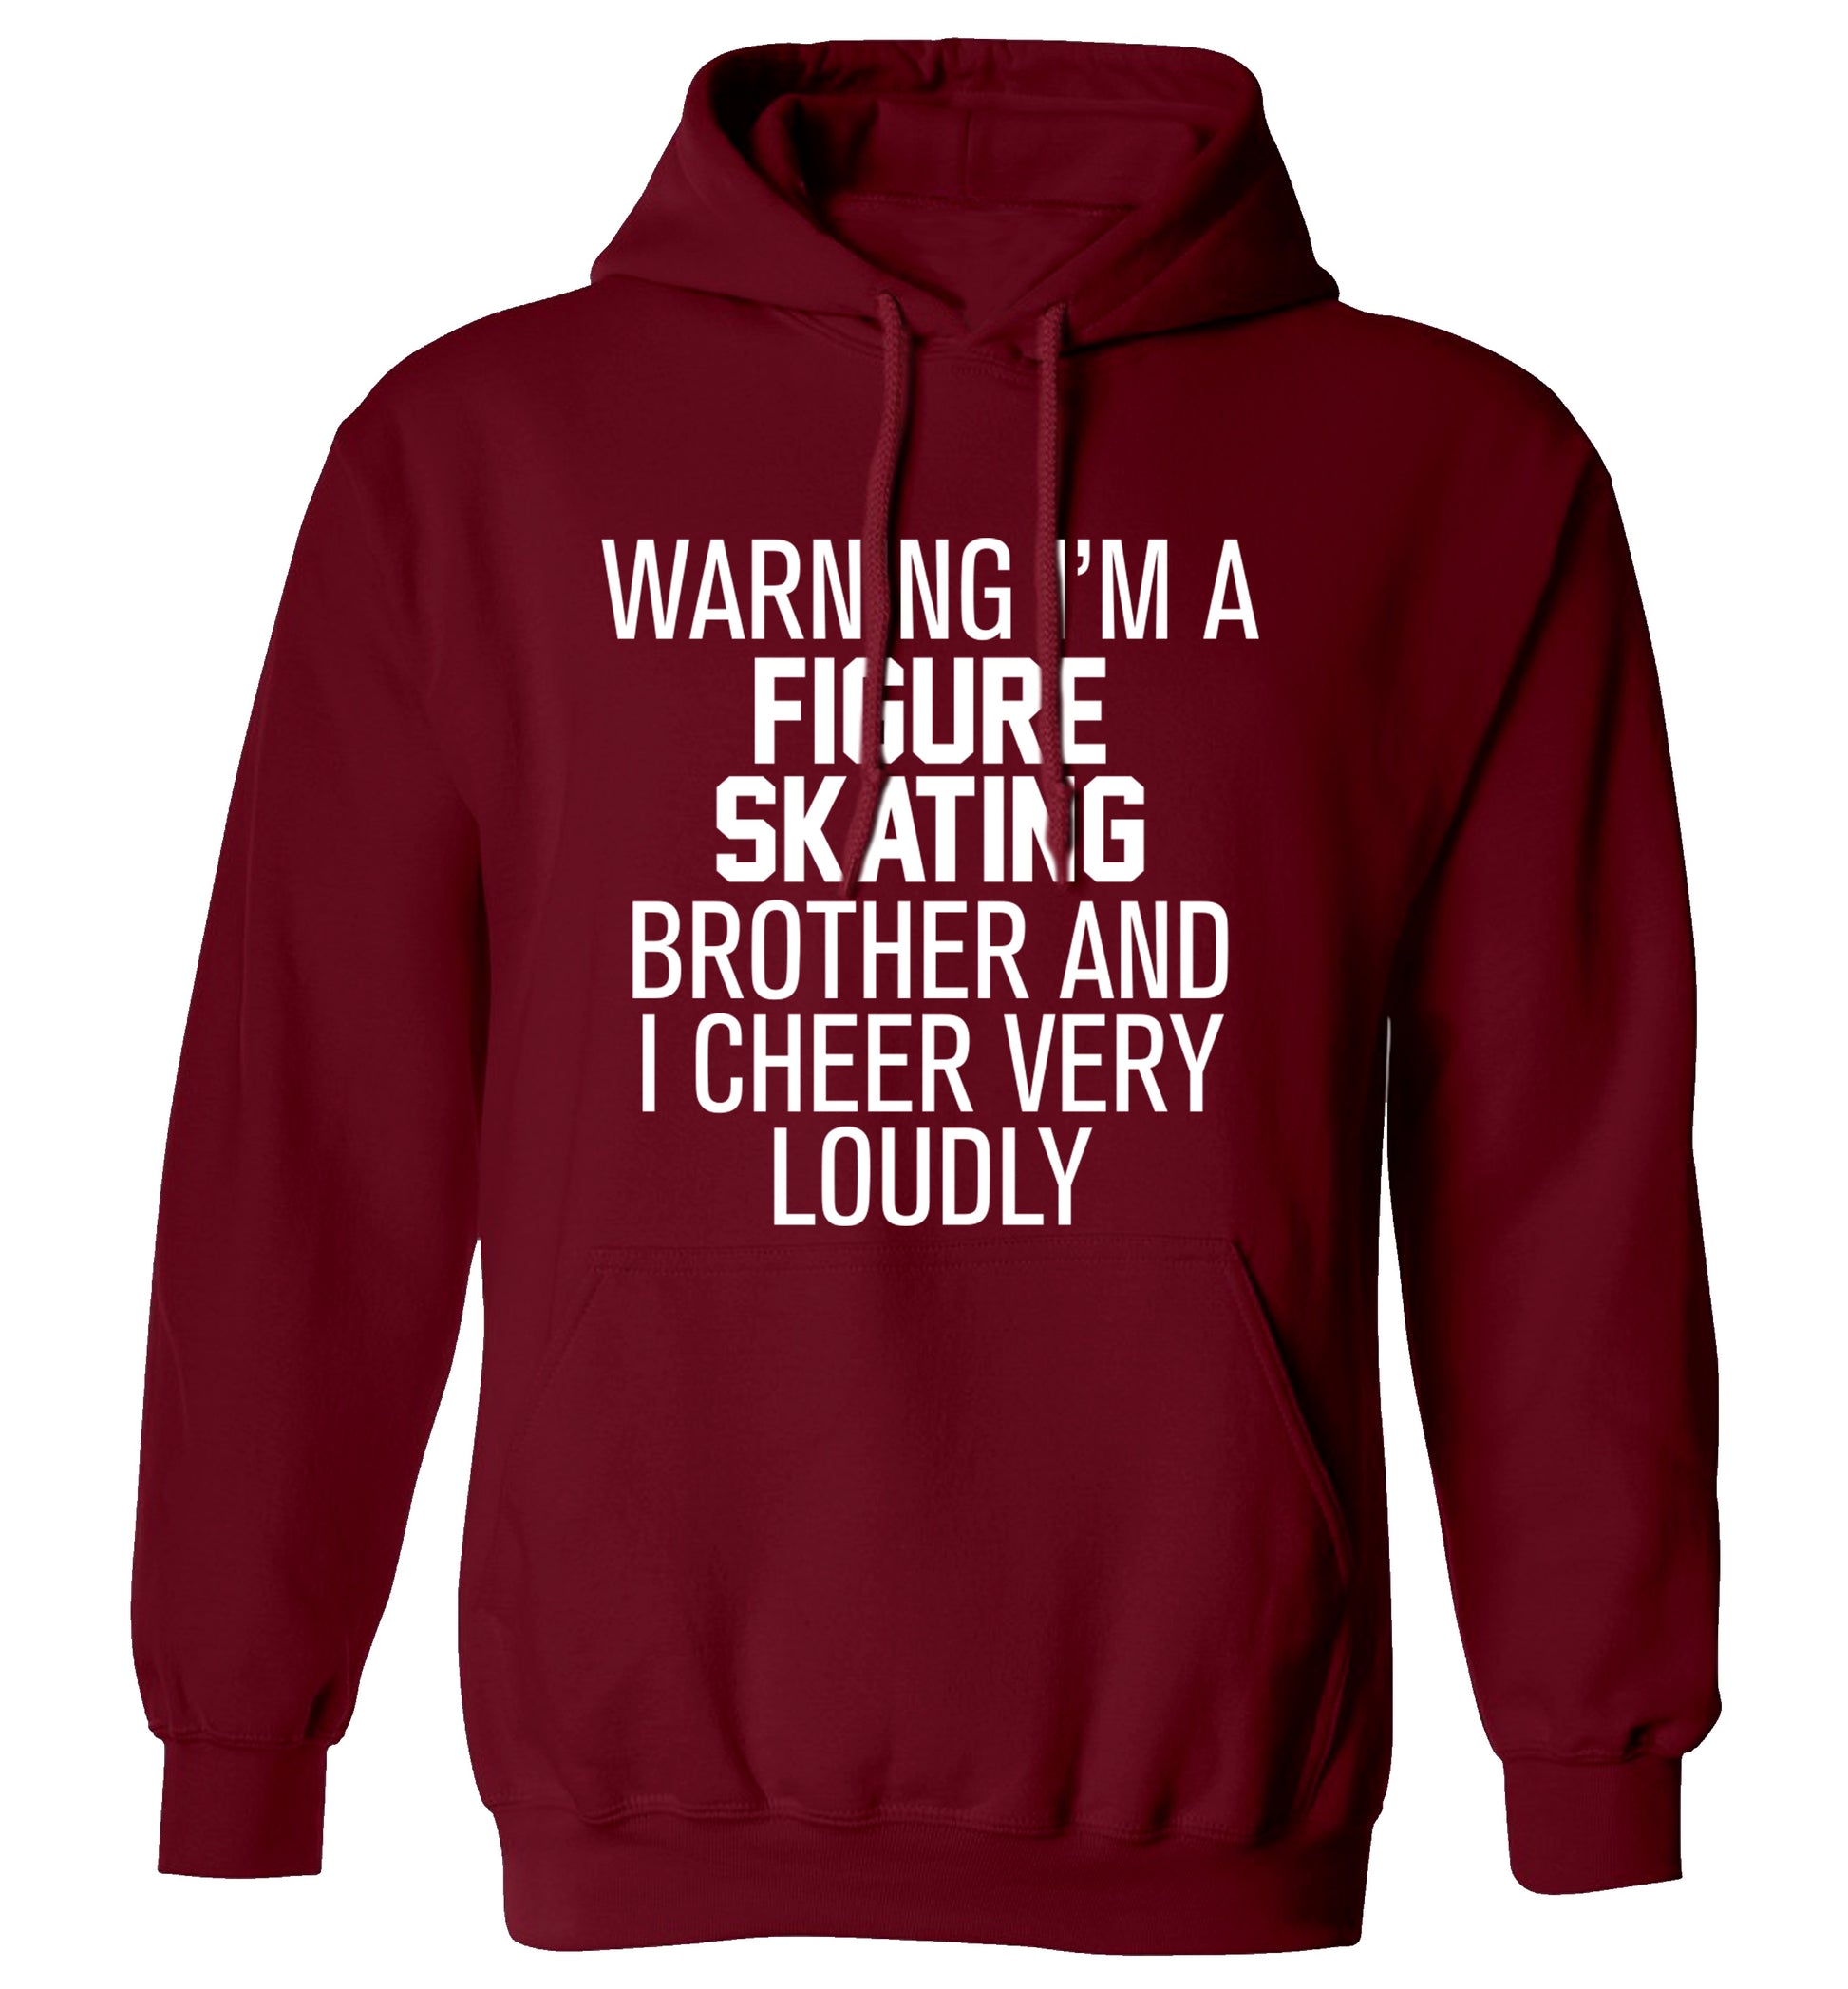 Warning I'm a figure skating brother and I cheer very loudly adults unisexmaroon hoodie 2XL